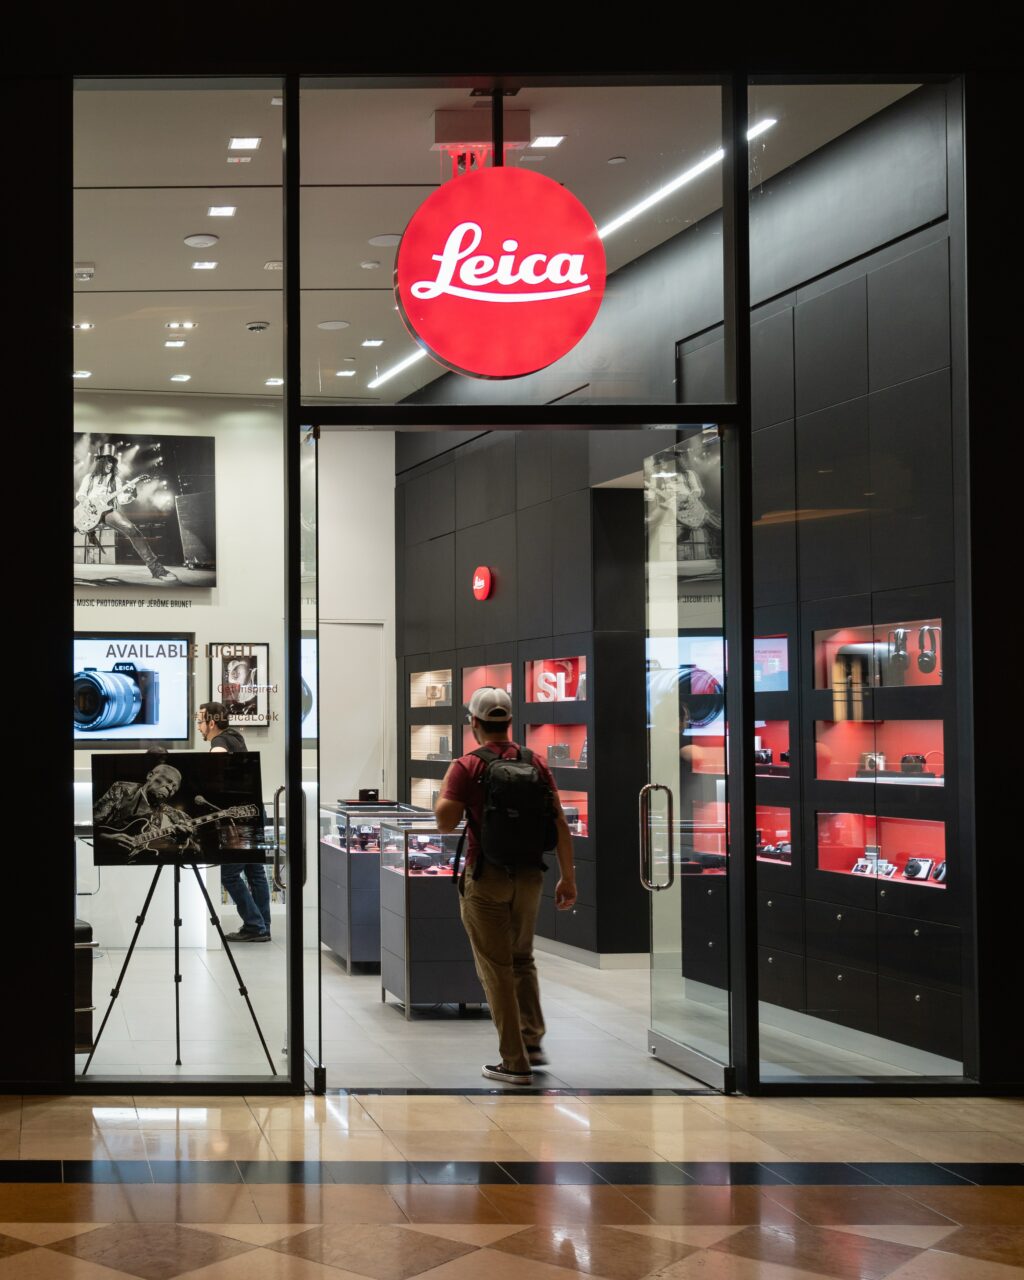 Exterior shot of a large Leica camera store